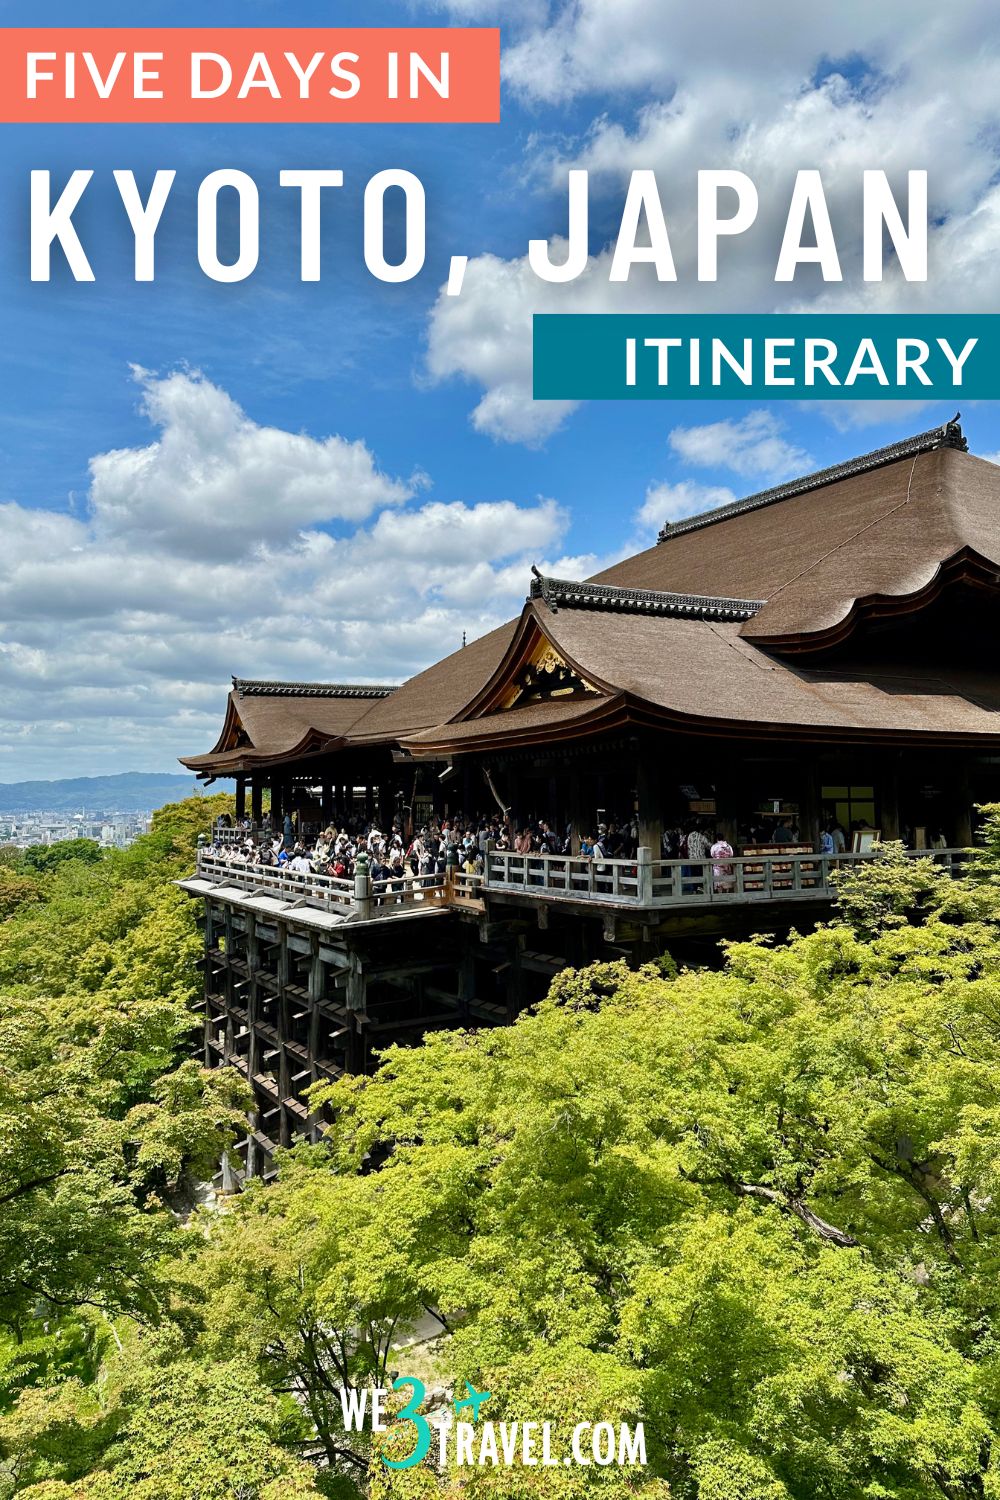 Five days in Kyoto itinerary